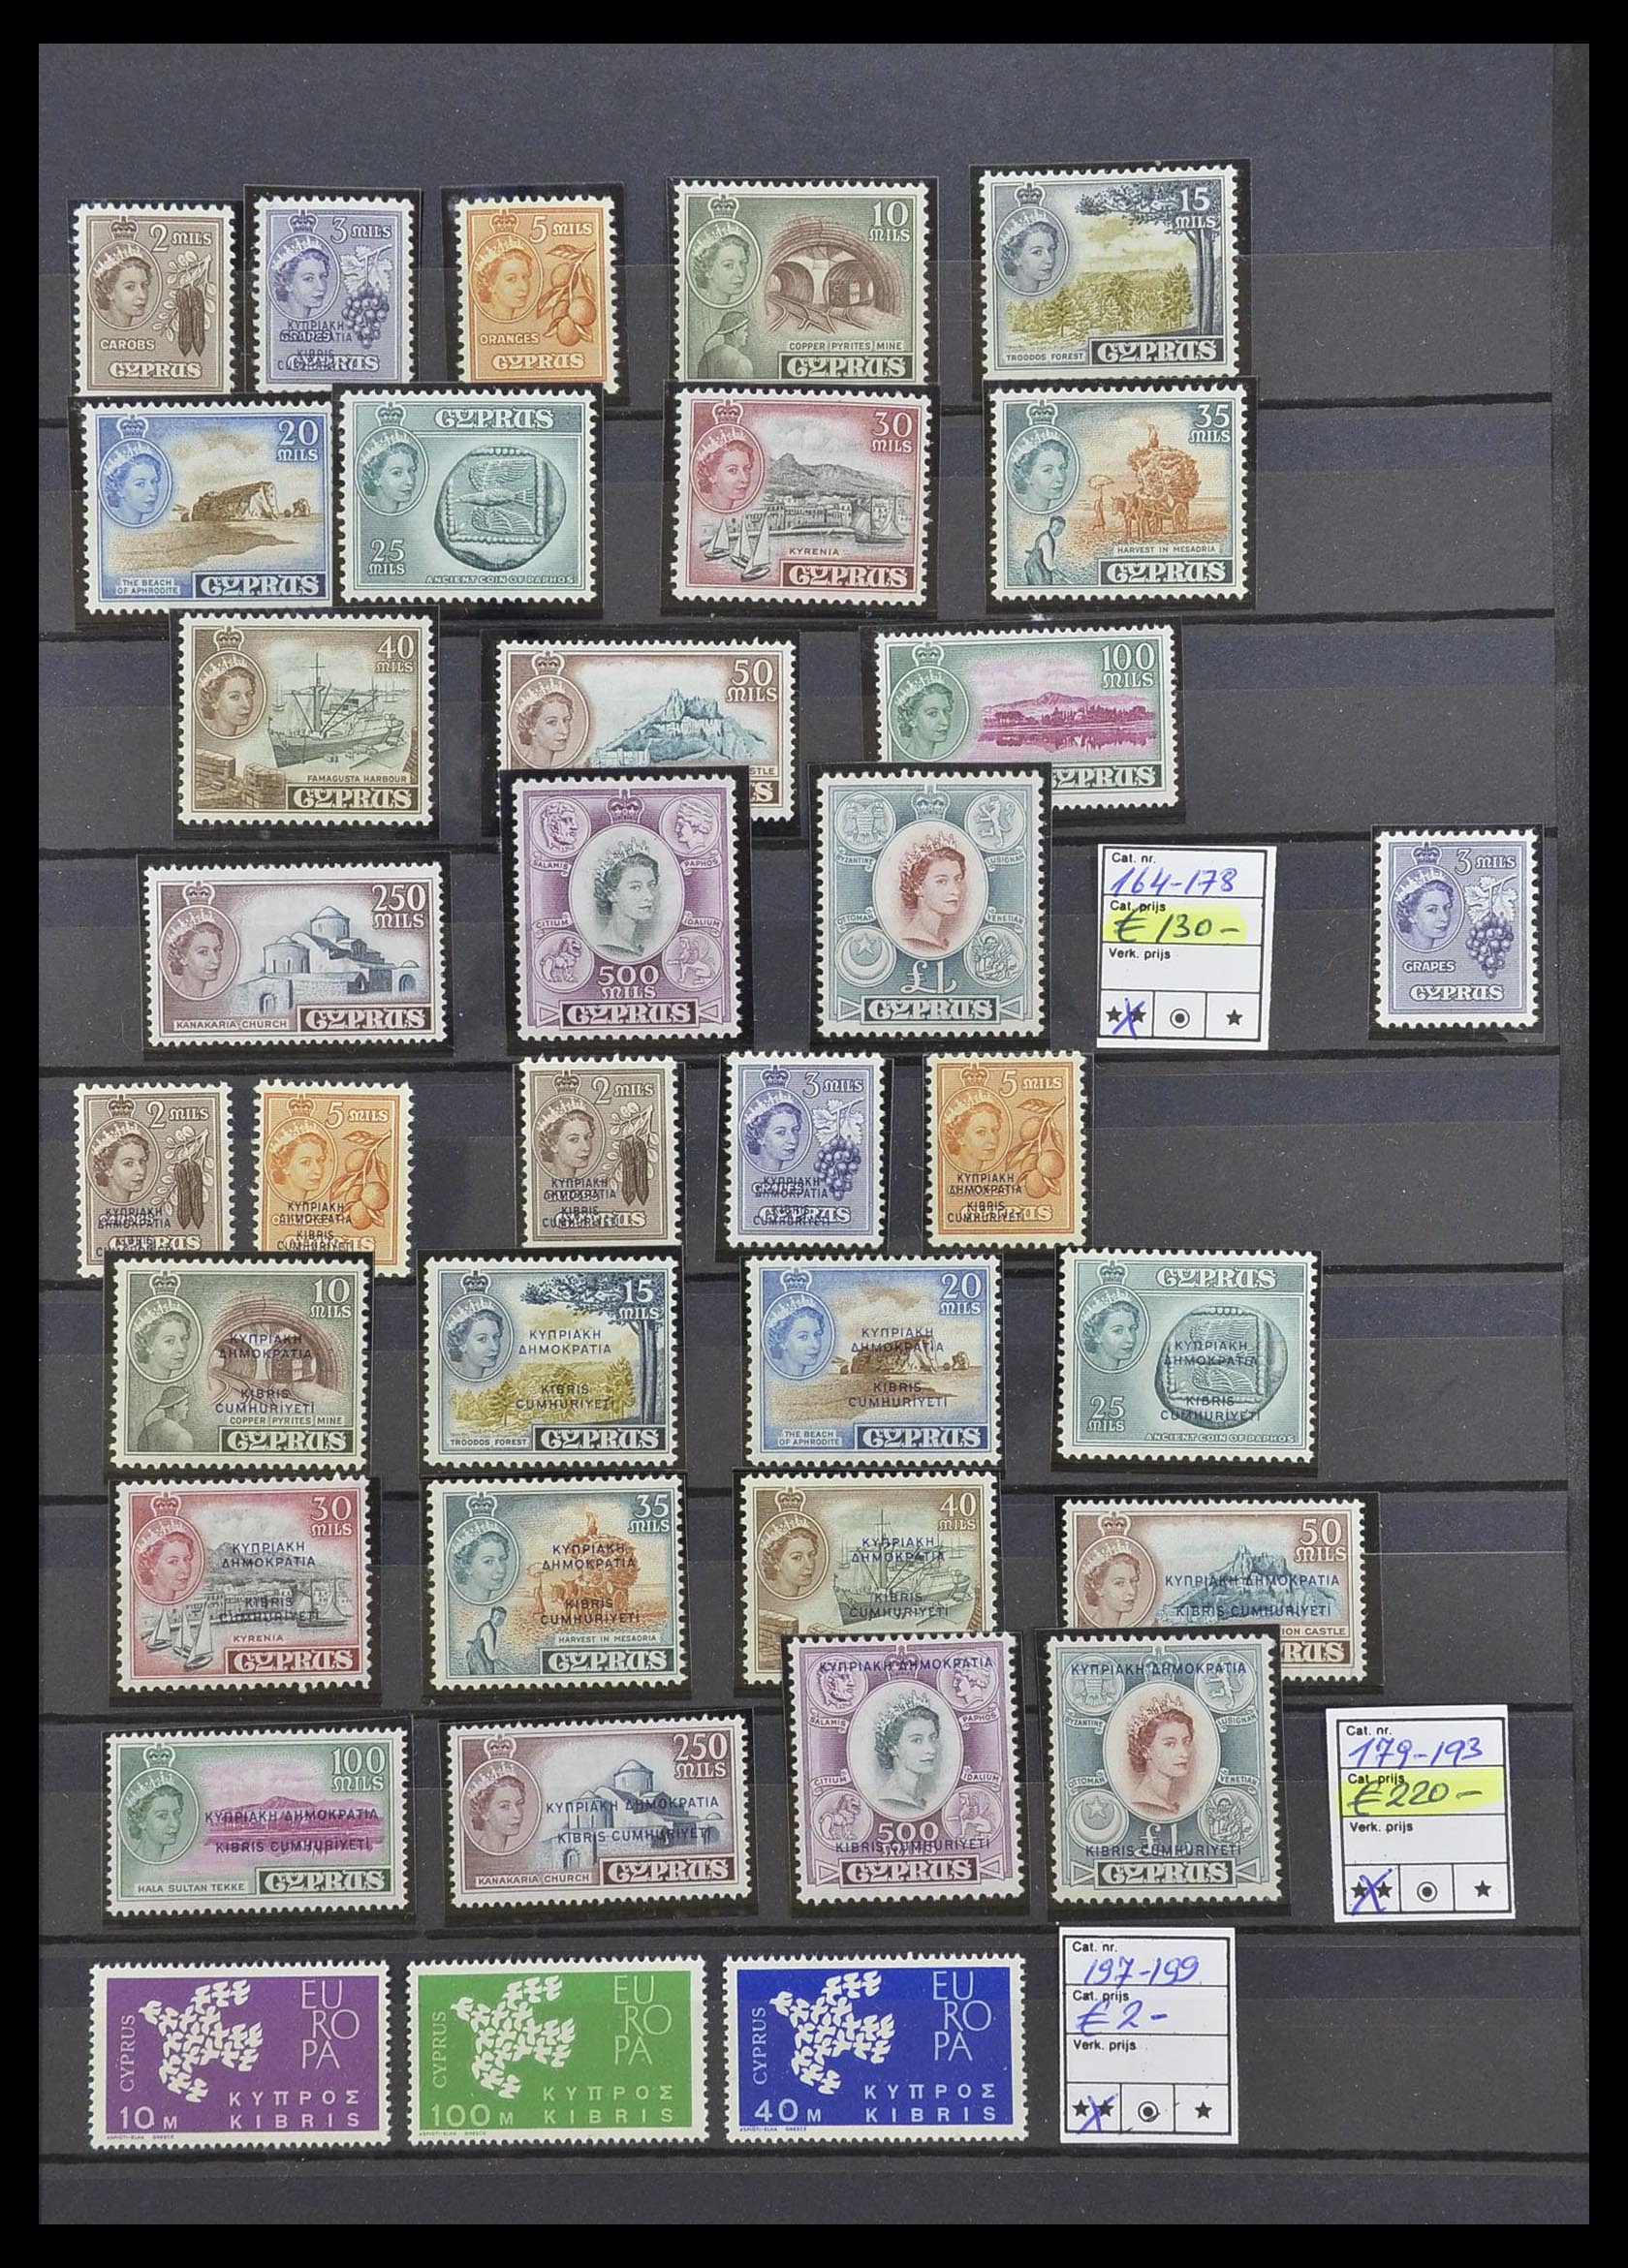 33217 009 - Stamp collection 33217 Cyprus 1955-1988 and Turkish Cyprus 1974-1985.